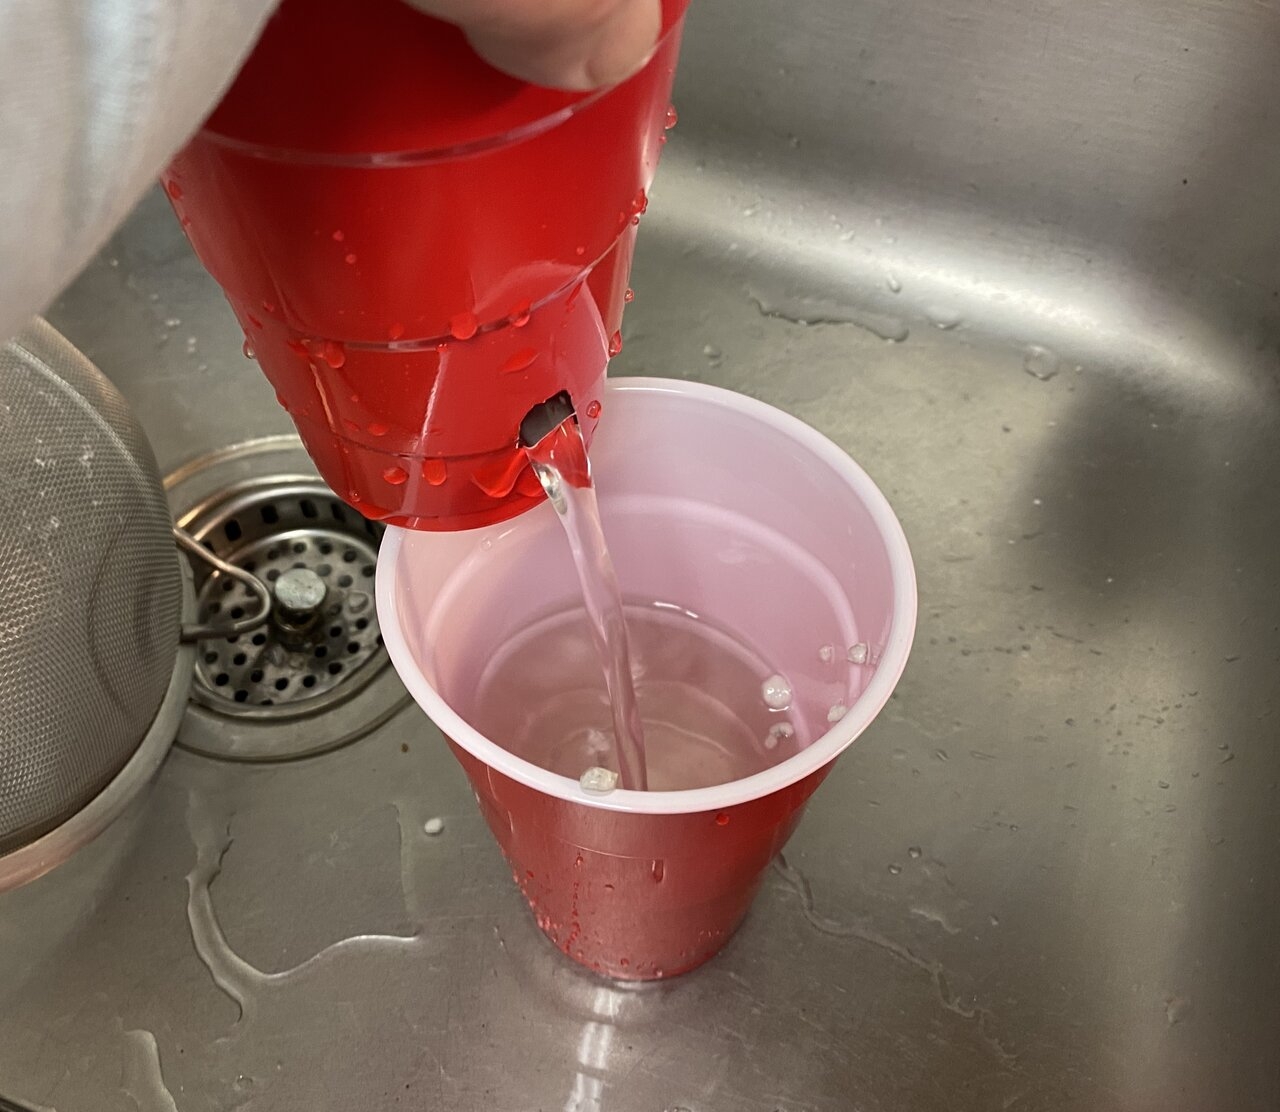 Lift hempy cup up and let it drain to the reservoir depth.